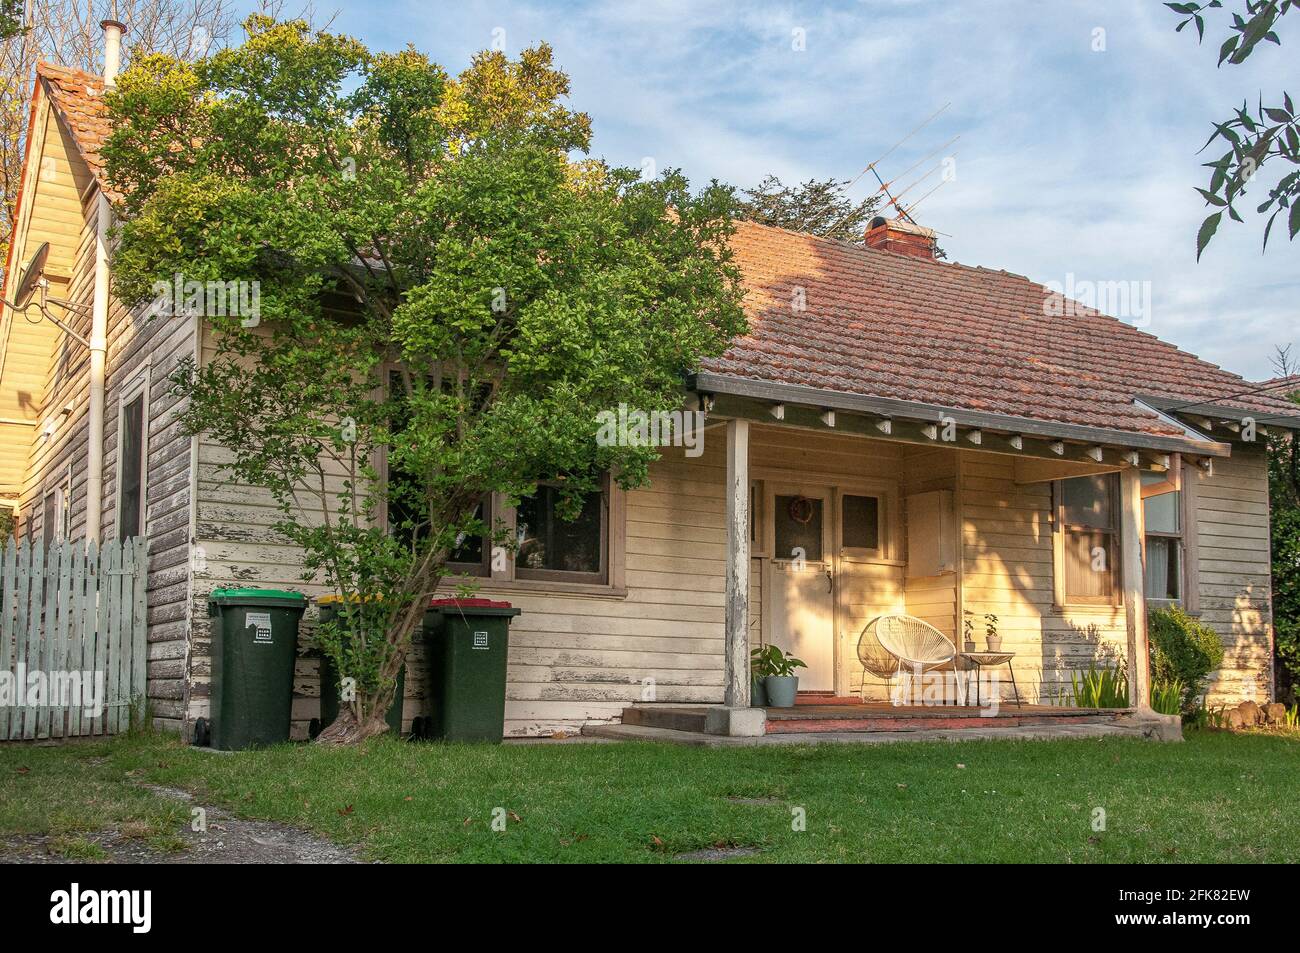 Recently vacated, an unassuming rental property awaits new tenants - or redevelopment - in suburban Caulfield, Melbourne, Australia Stock Photo